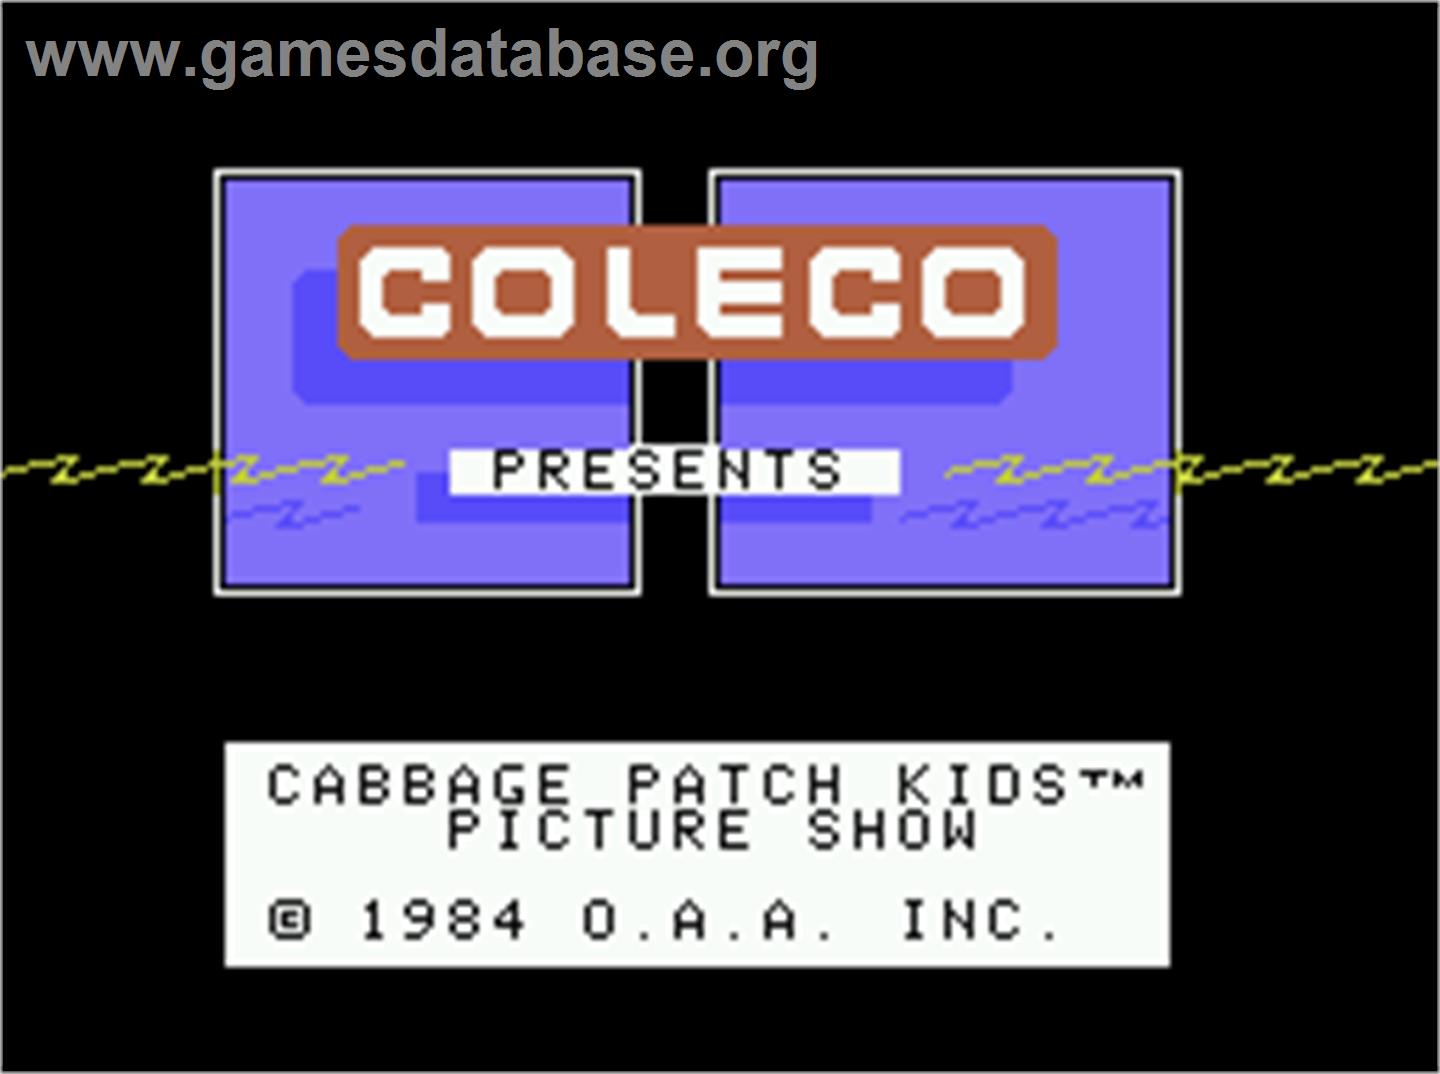 Cabbage Patch Kids Picture Show - Coleco Vision - Artwork - Title Screen